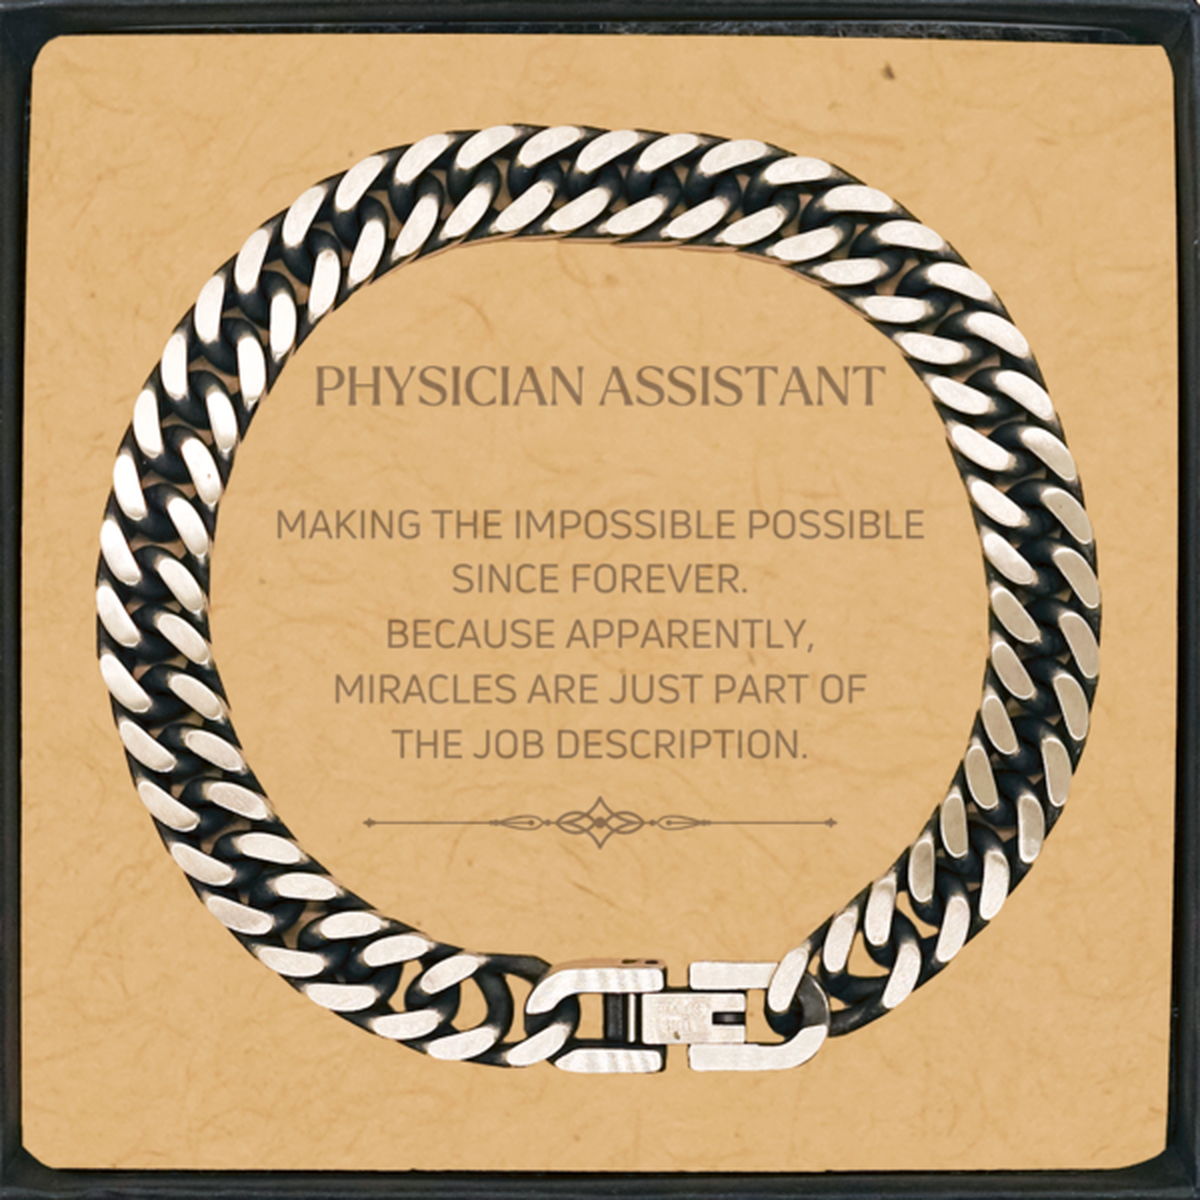 Funny Physician Assistant Gifts, Miracles are just part of the job description, Inspirational Birthday Cuban Link Chain Bracelet For Physician Assistant, Men, Women, Coworkers, Friends, Boss